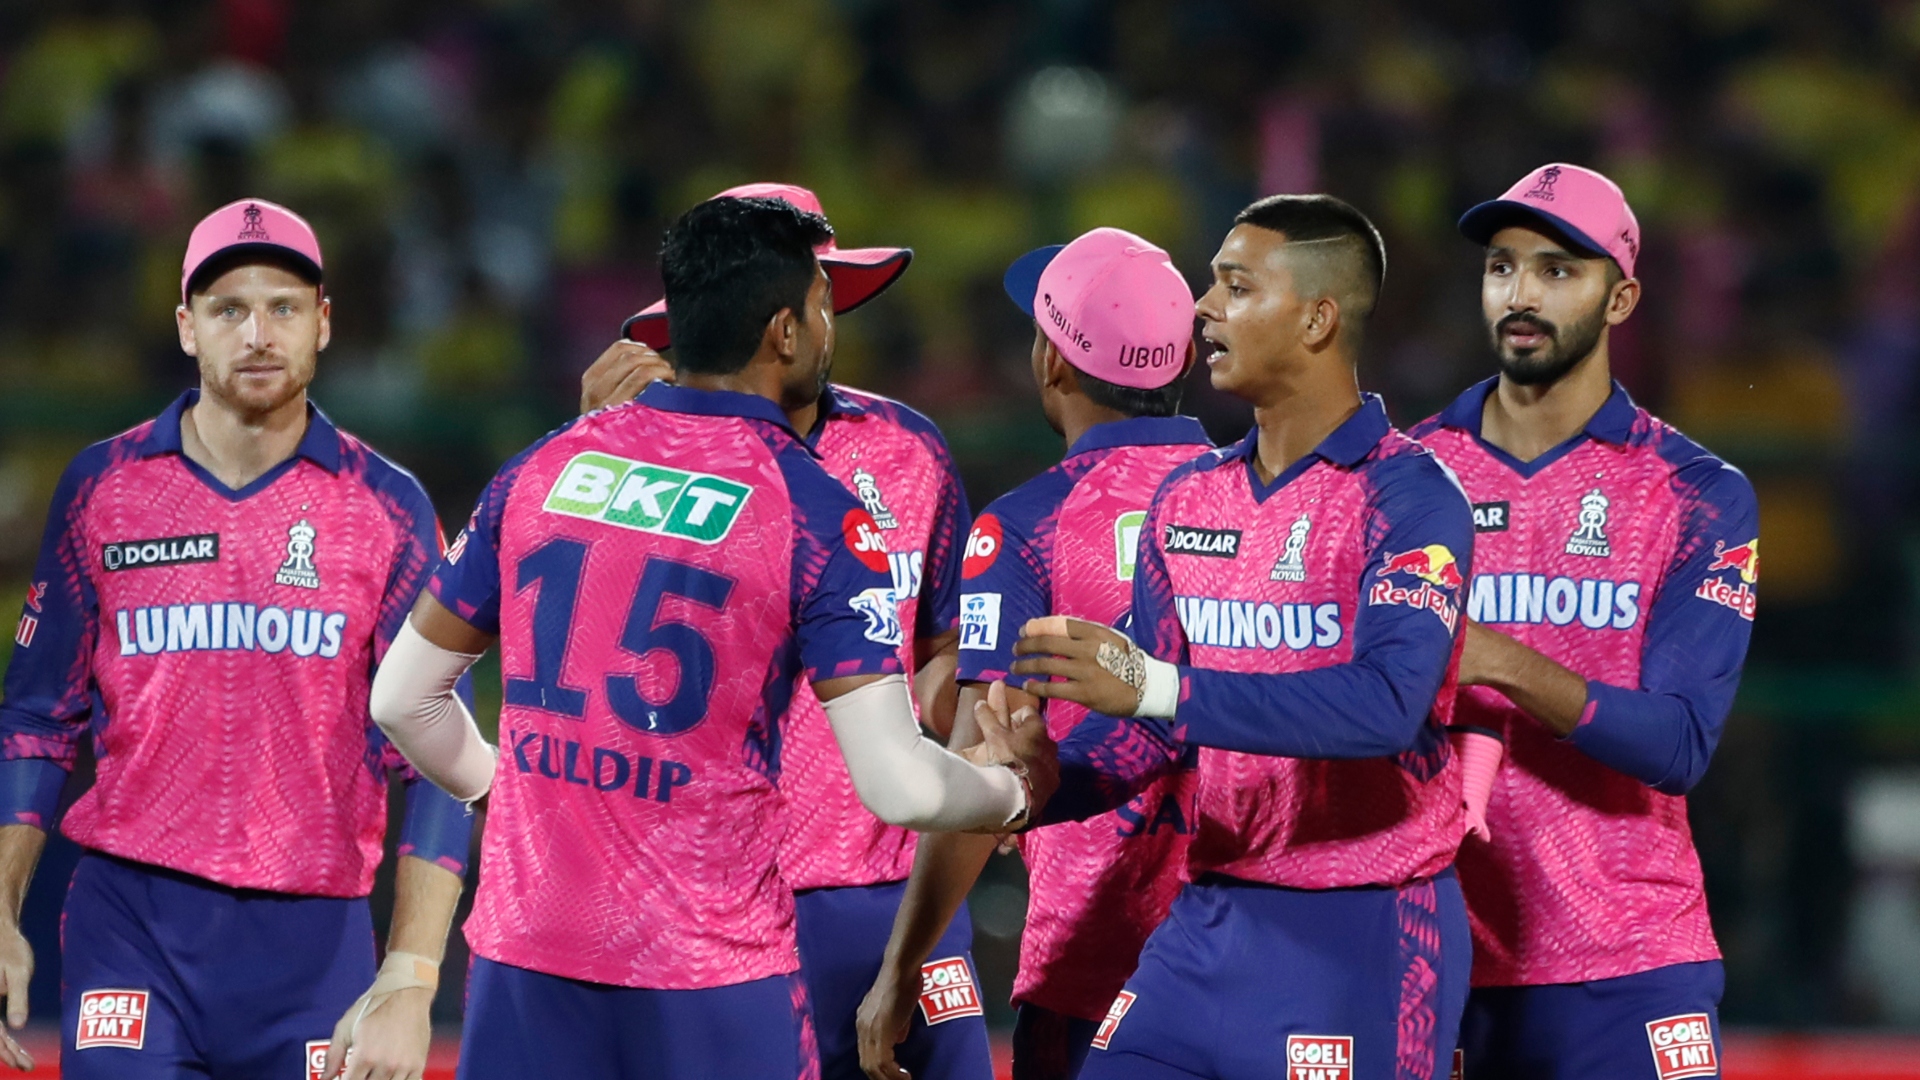 Royals surge to top of IPL after blistering batting against Super Kings